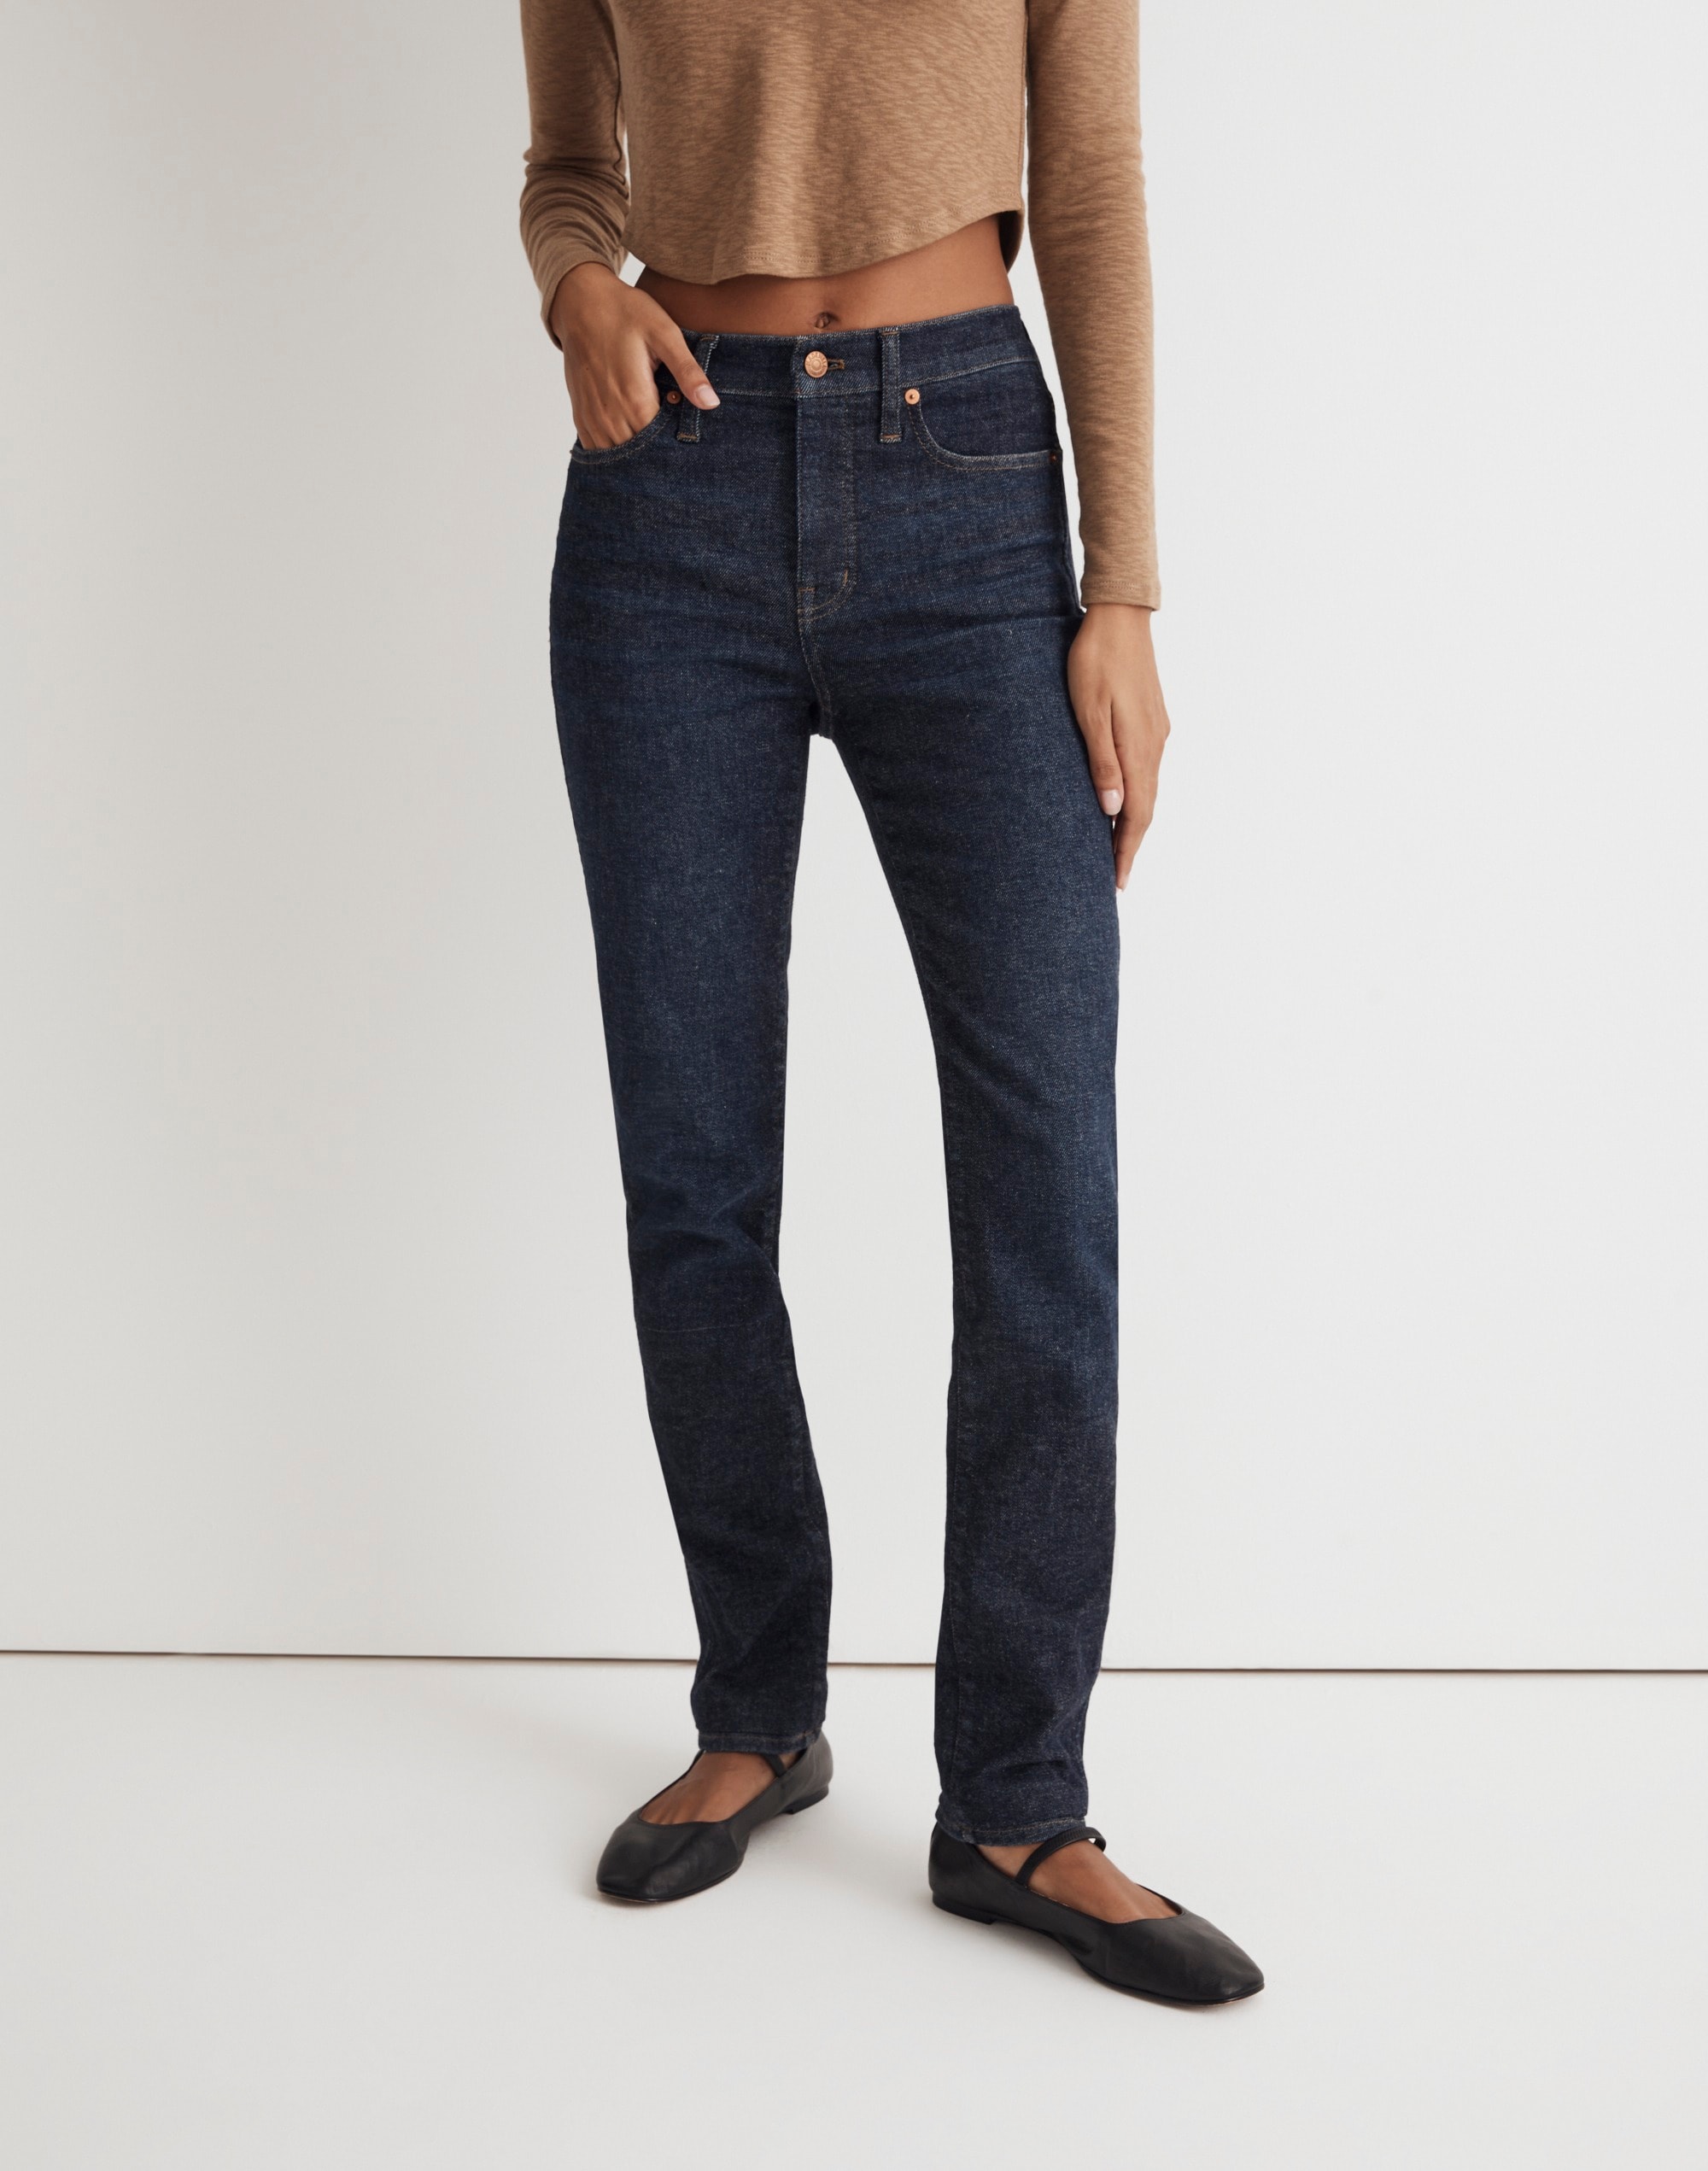 Mid-Rise Stovepipe Jeans in Dalesford Wash